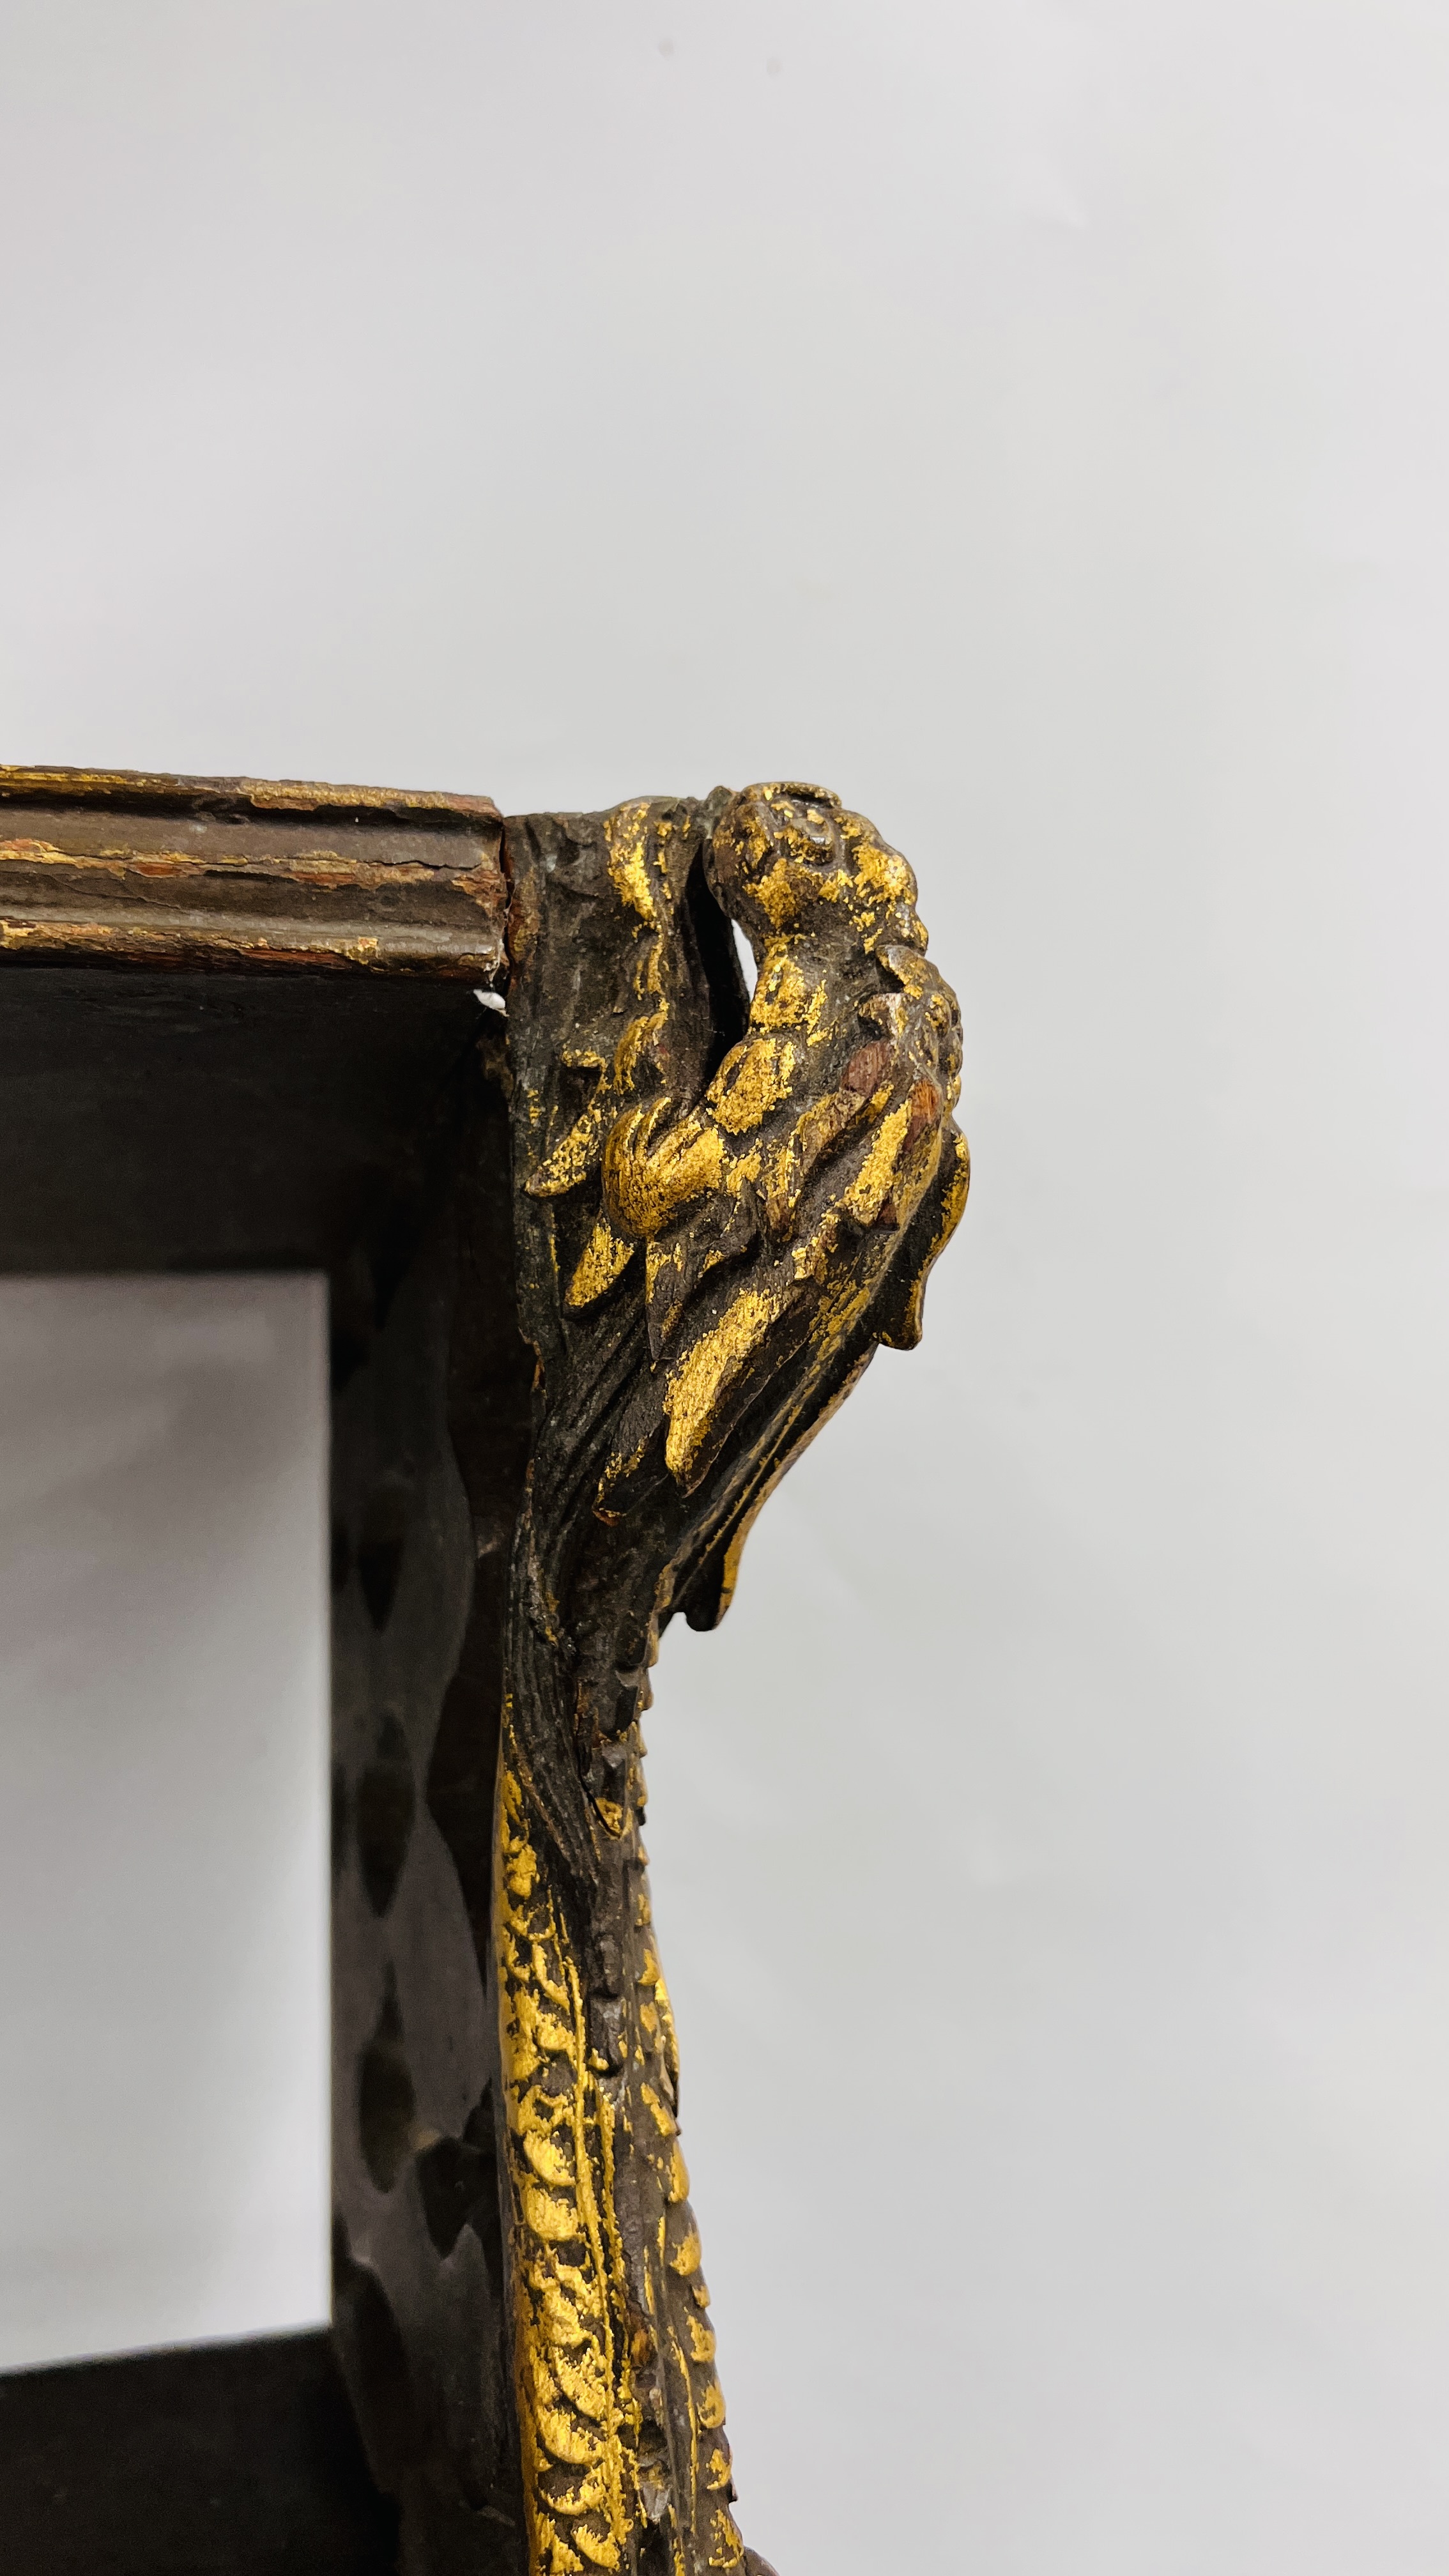 C20TH CHINESE STYLE THREE TIER BRACKET SHELF WITH DRAGON CARVED DETAIL - W 117CM. H 60CM. D 24CM. - Image 4 of 9